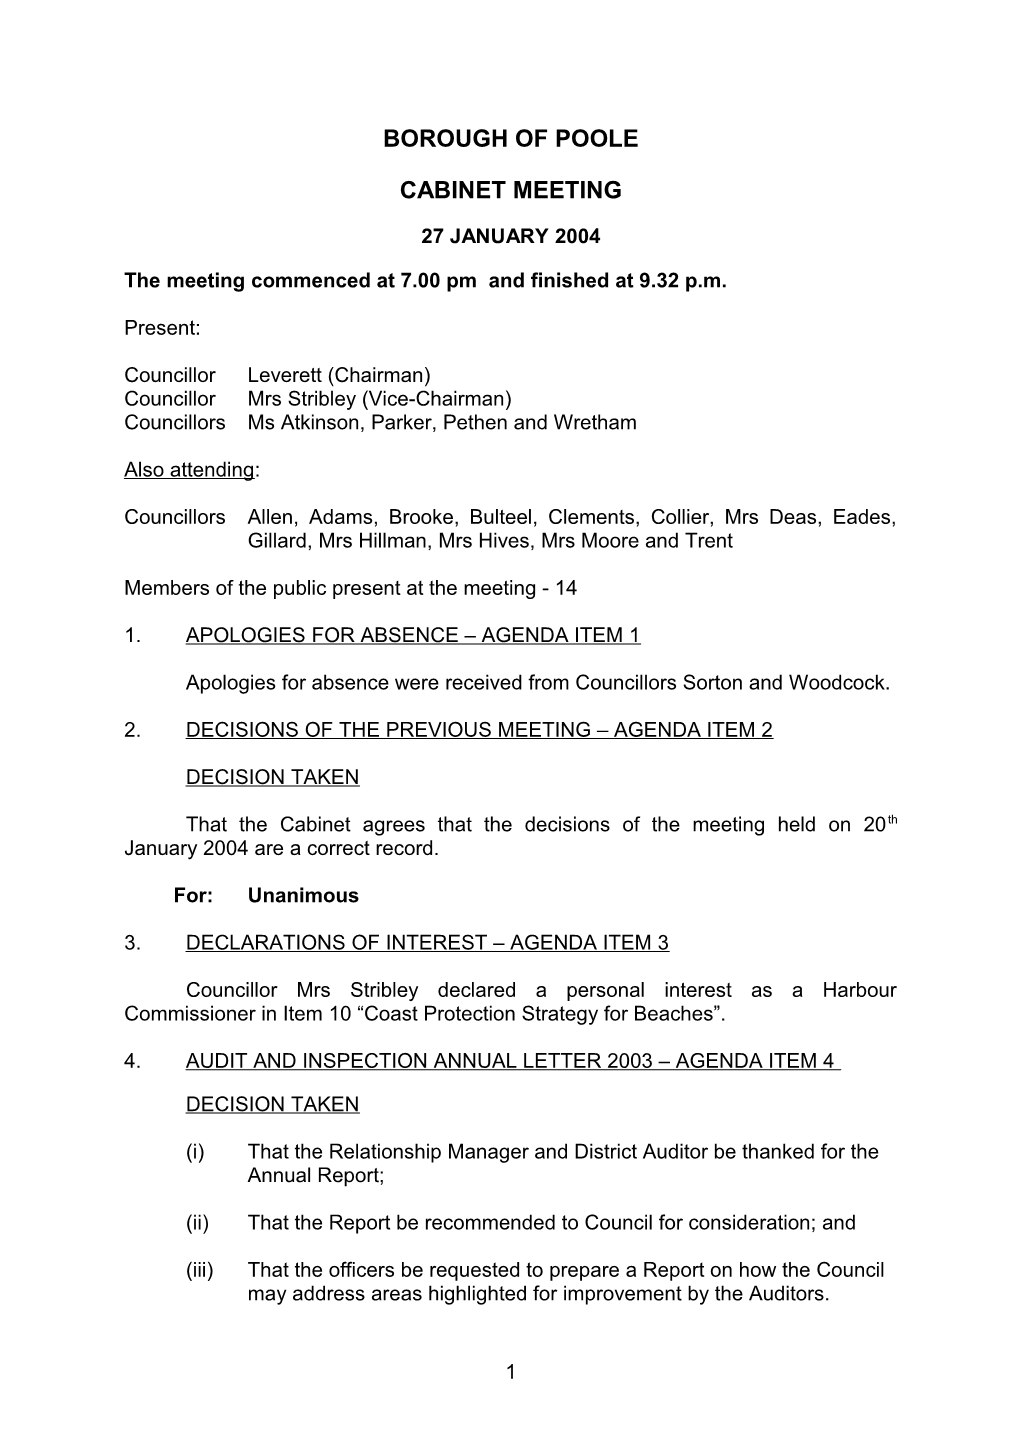 The Meeting Commenced at 7.00 Pm and Finished at 9.32 P.M